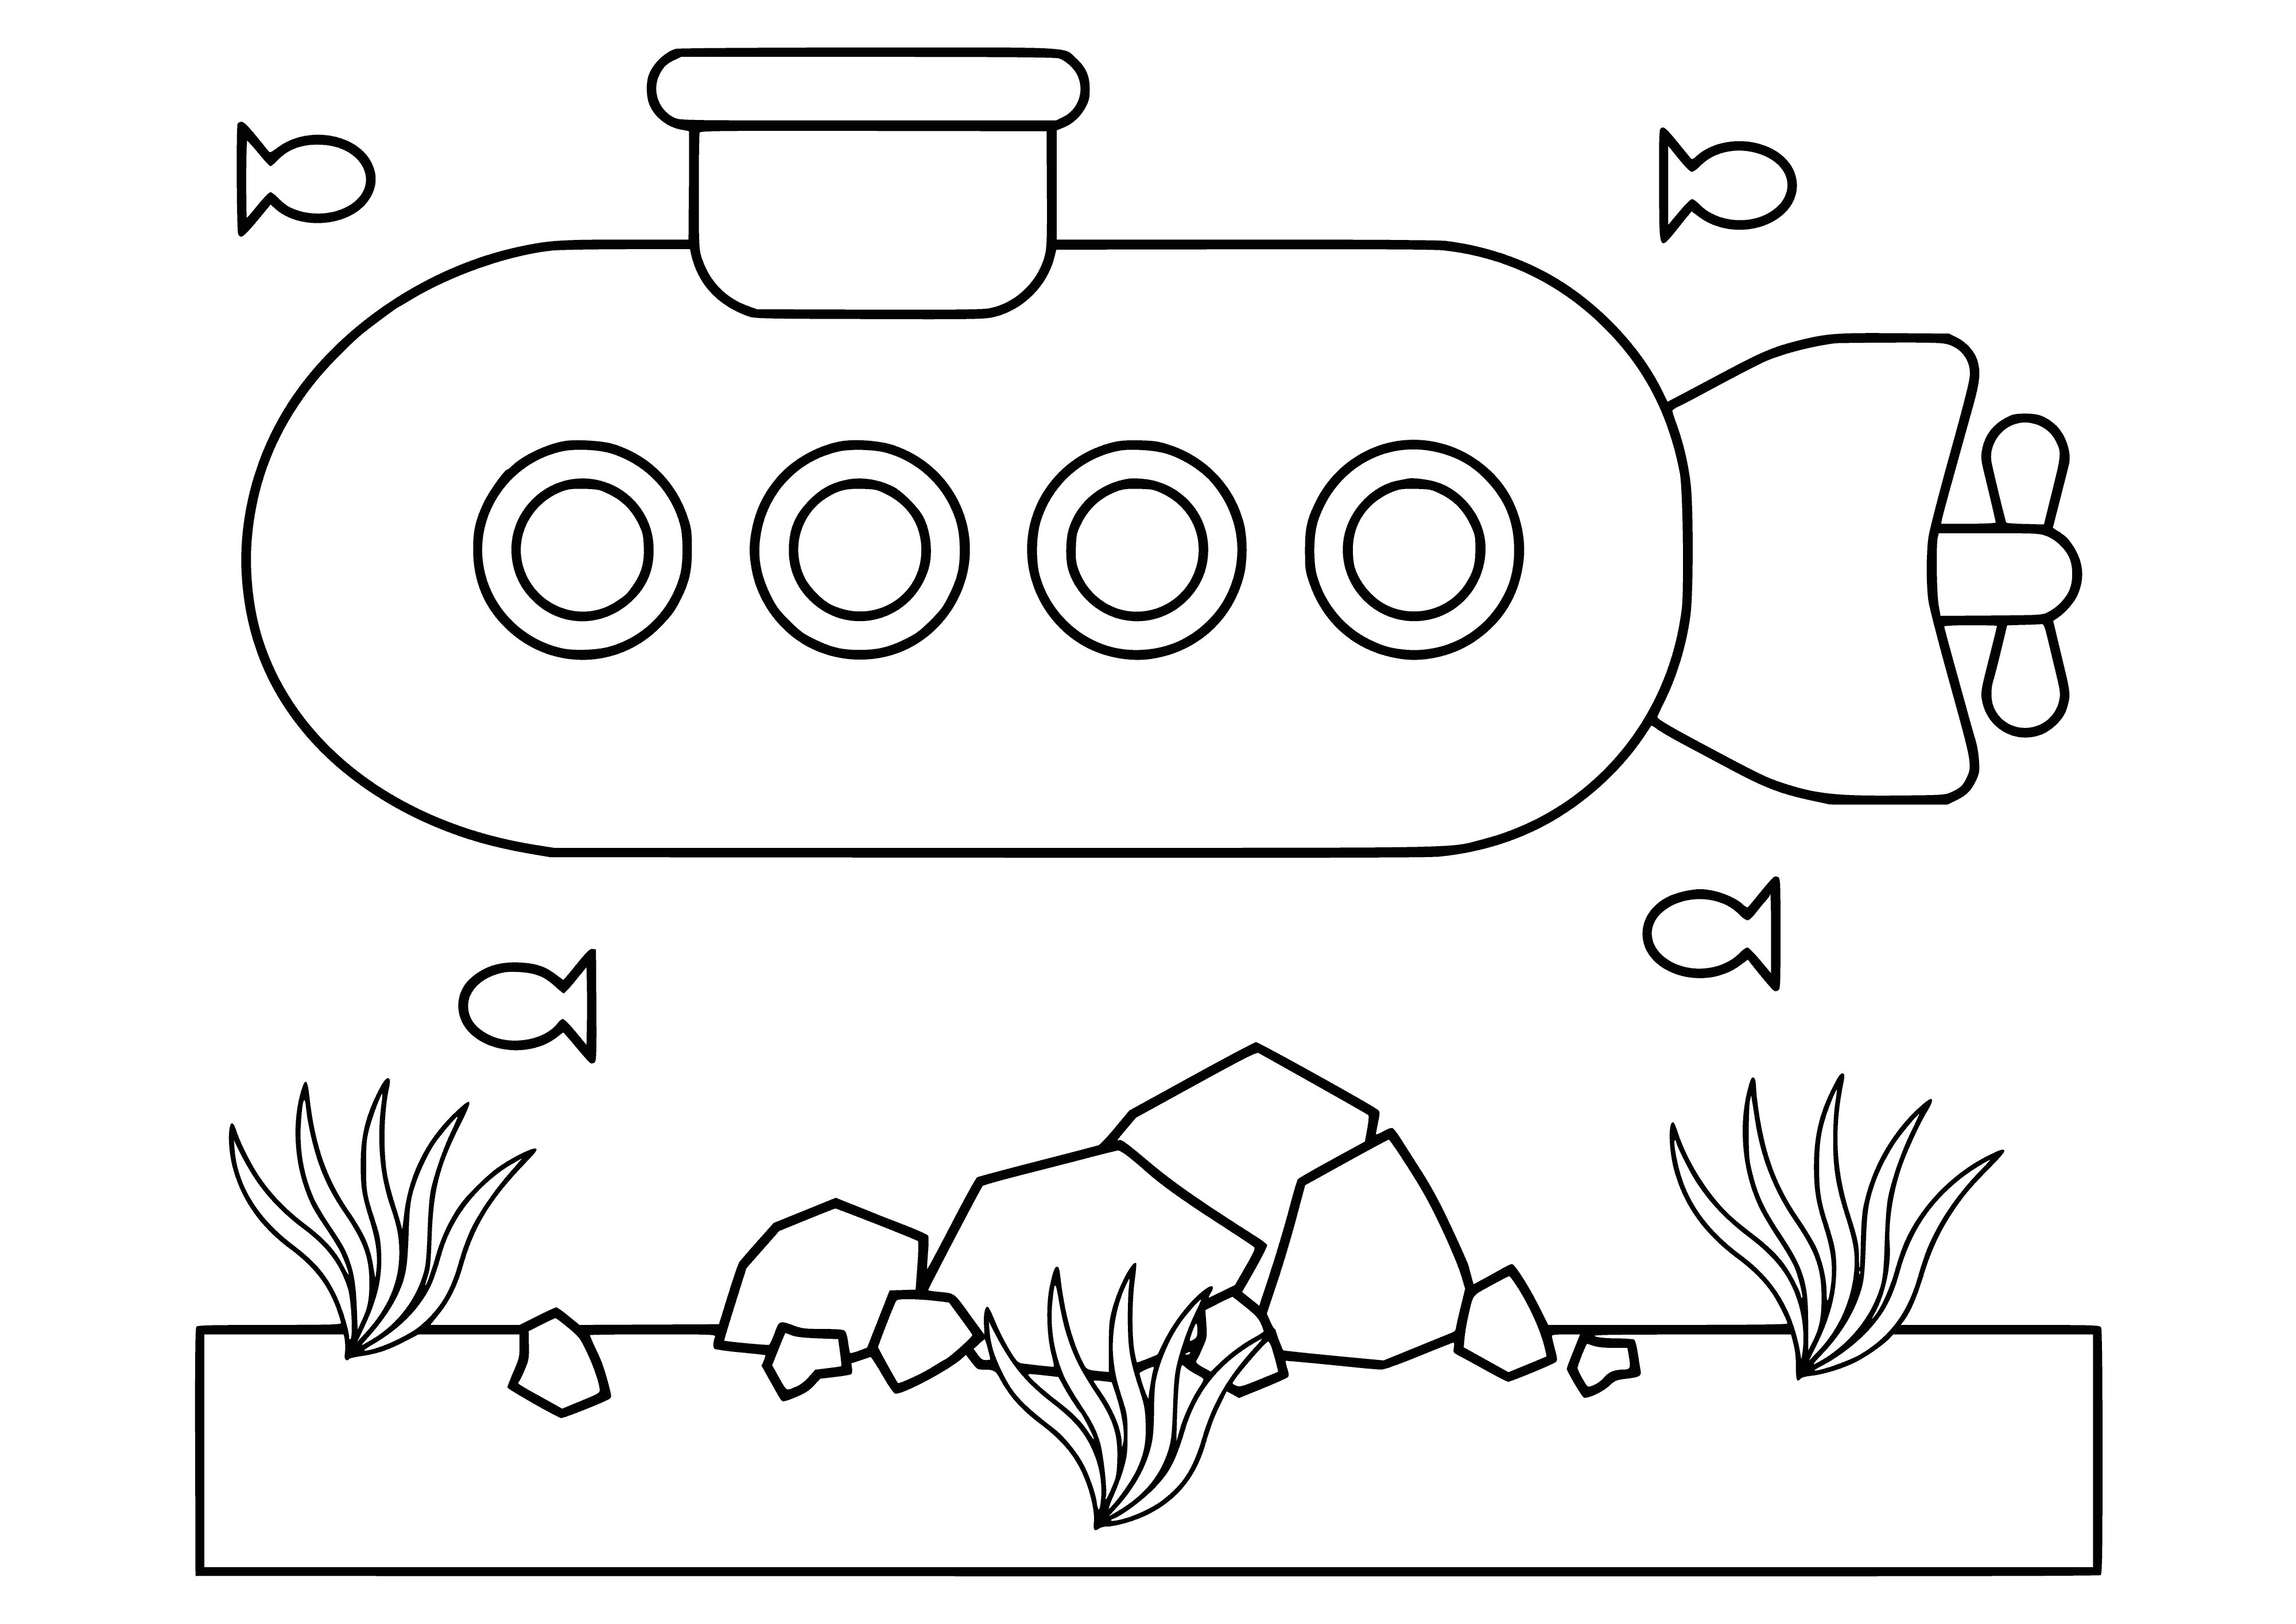 coloring page: Submarine sailing below a calm blue sea with fish swimming around it, warmed by the sunny surface.